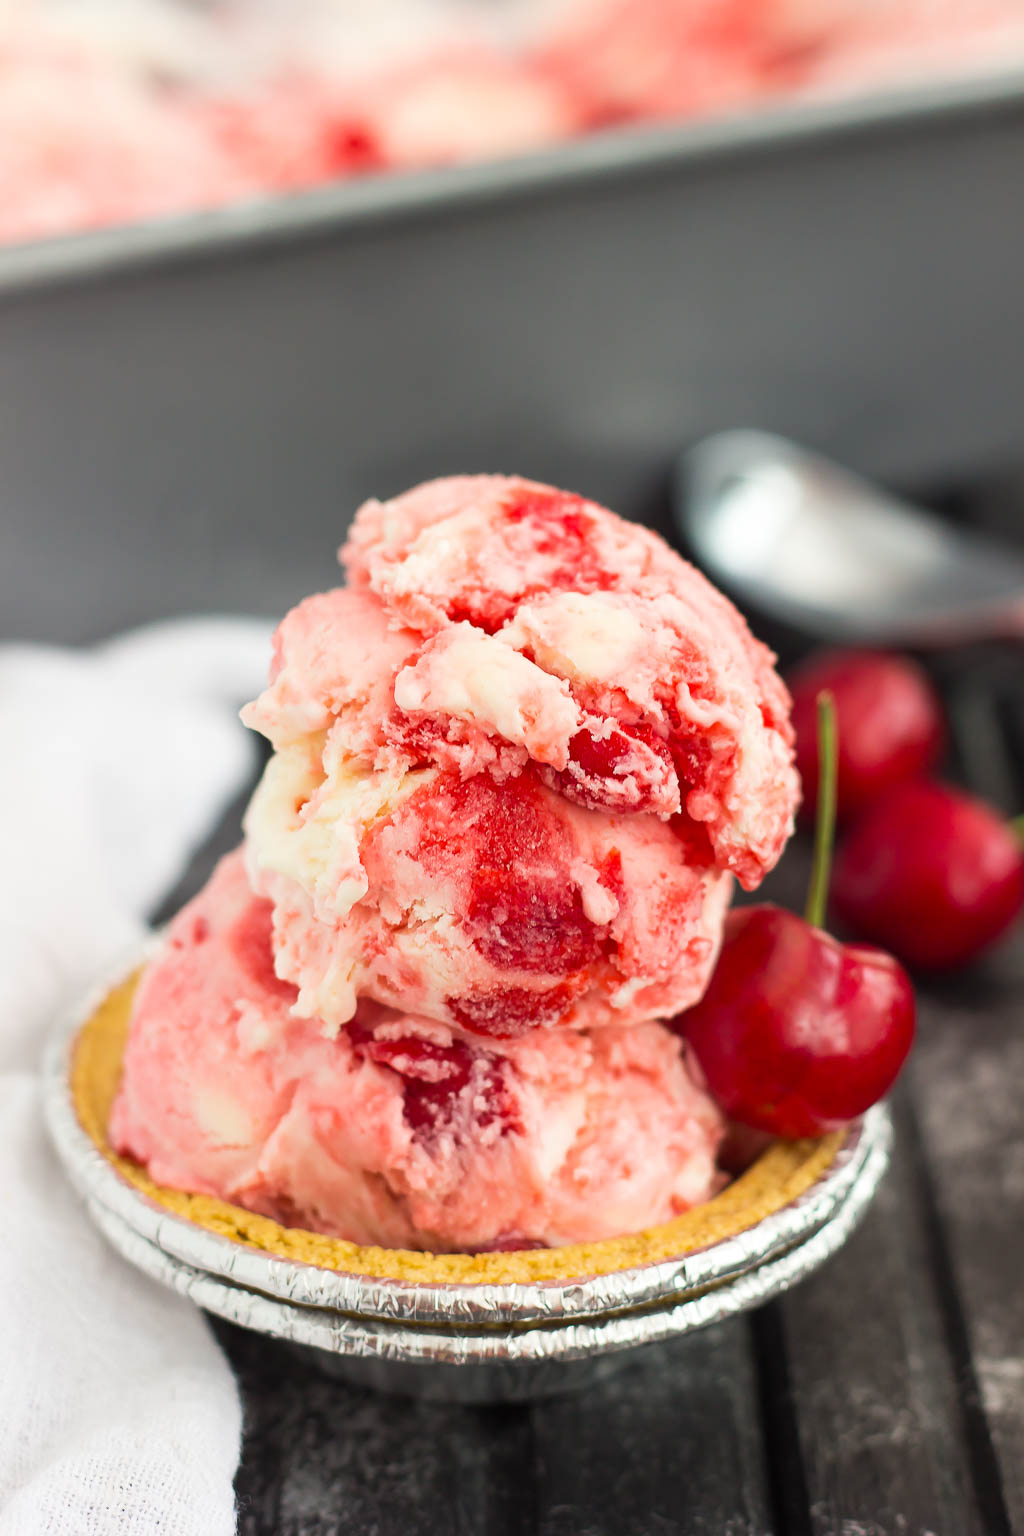 This easy, five ingredient Cherry Cheesecake Ice Cream is cool, creamy and packed with flavor. This no-churn treat features a vanilla cheesecake base that's loaded with juicy cherries. And best of all, it's made without an ice cream maker!